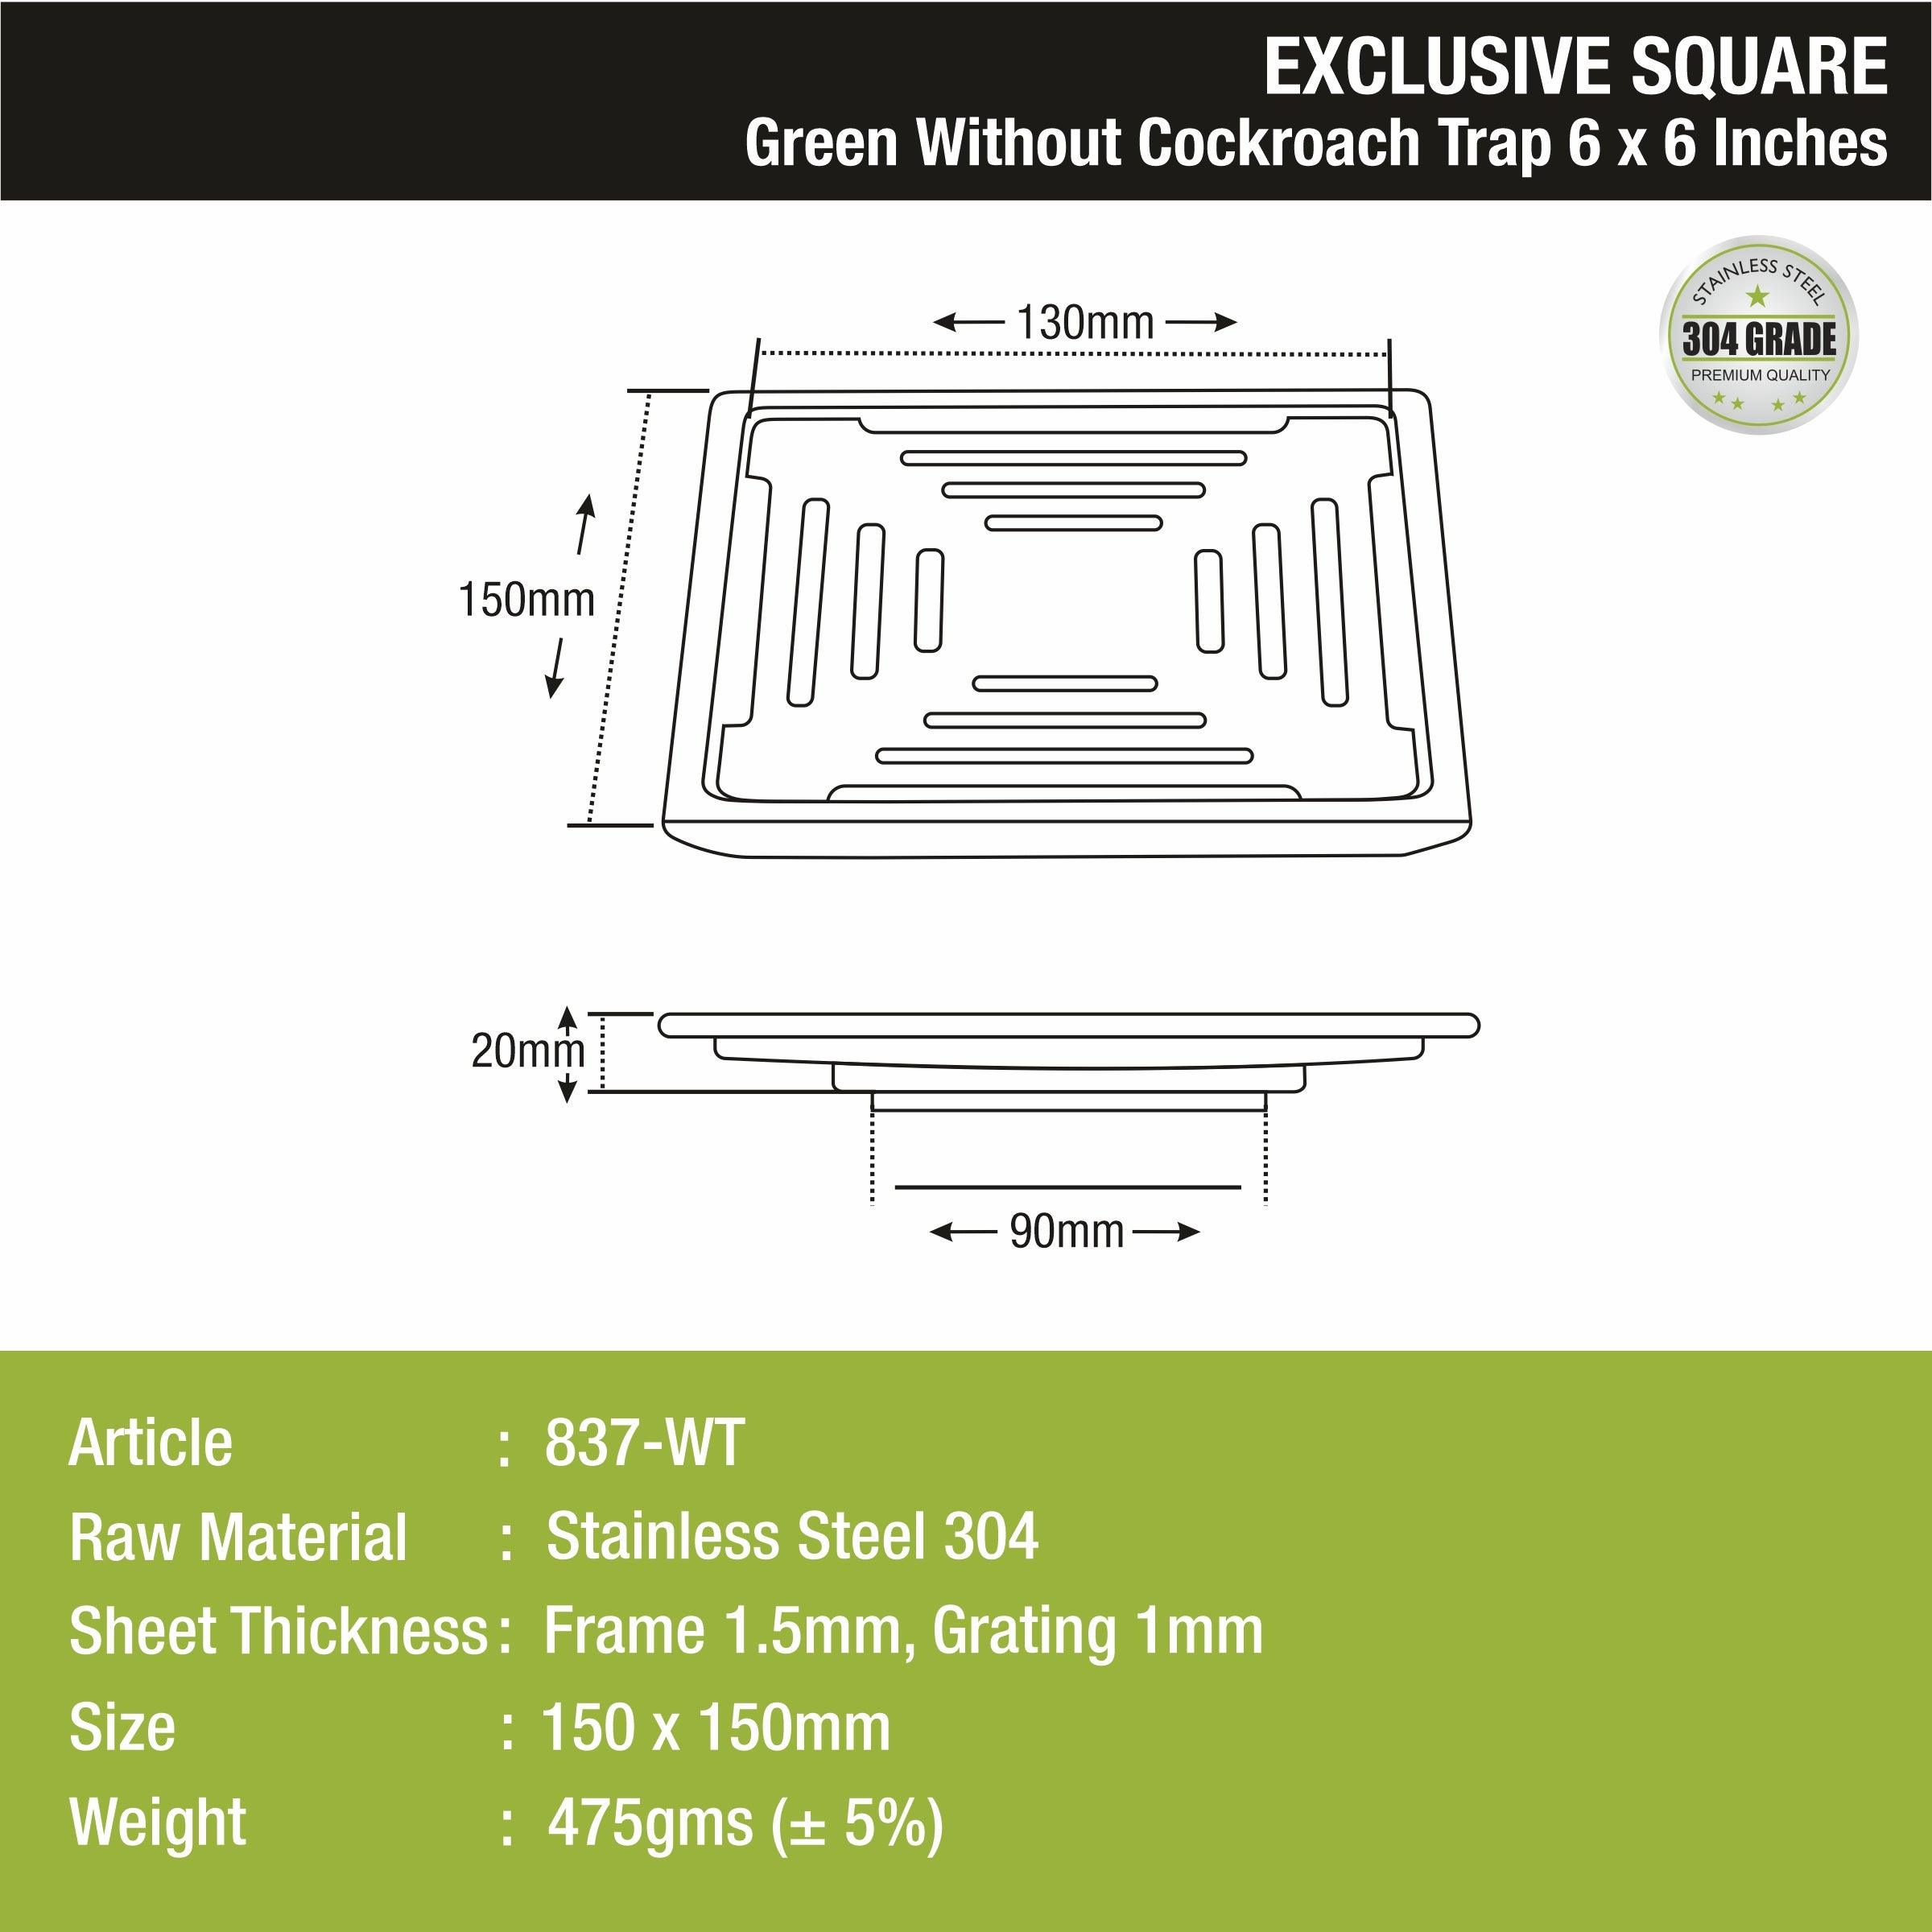 Green Exclusive Square Floor Drain (6 x 6 Inches) sizes and dimensions